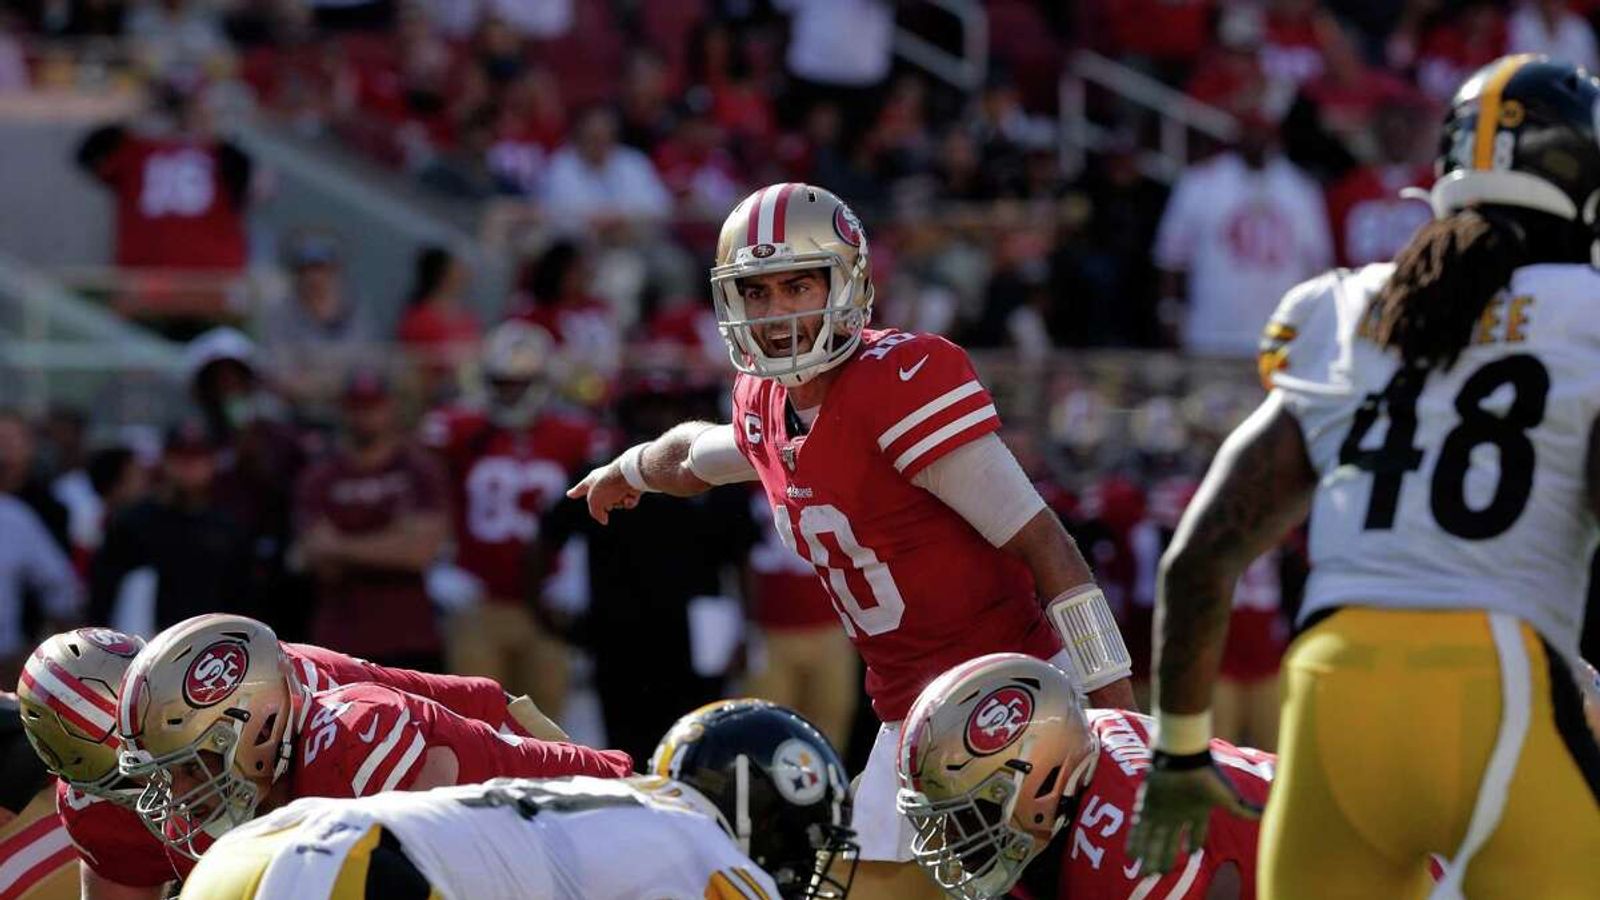 49ers clear QB Jimmy Garoppolo to practice and to seek trade, per report